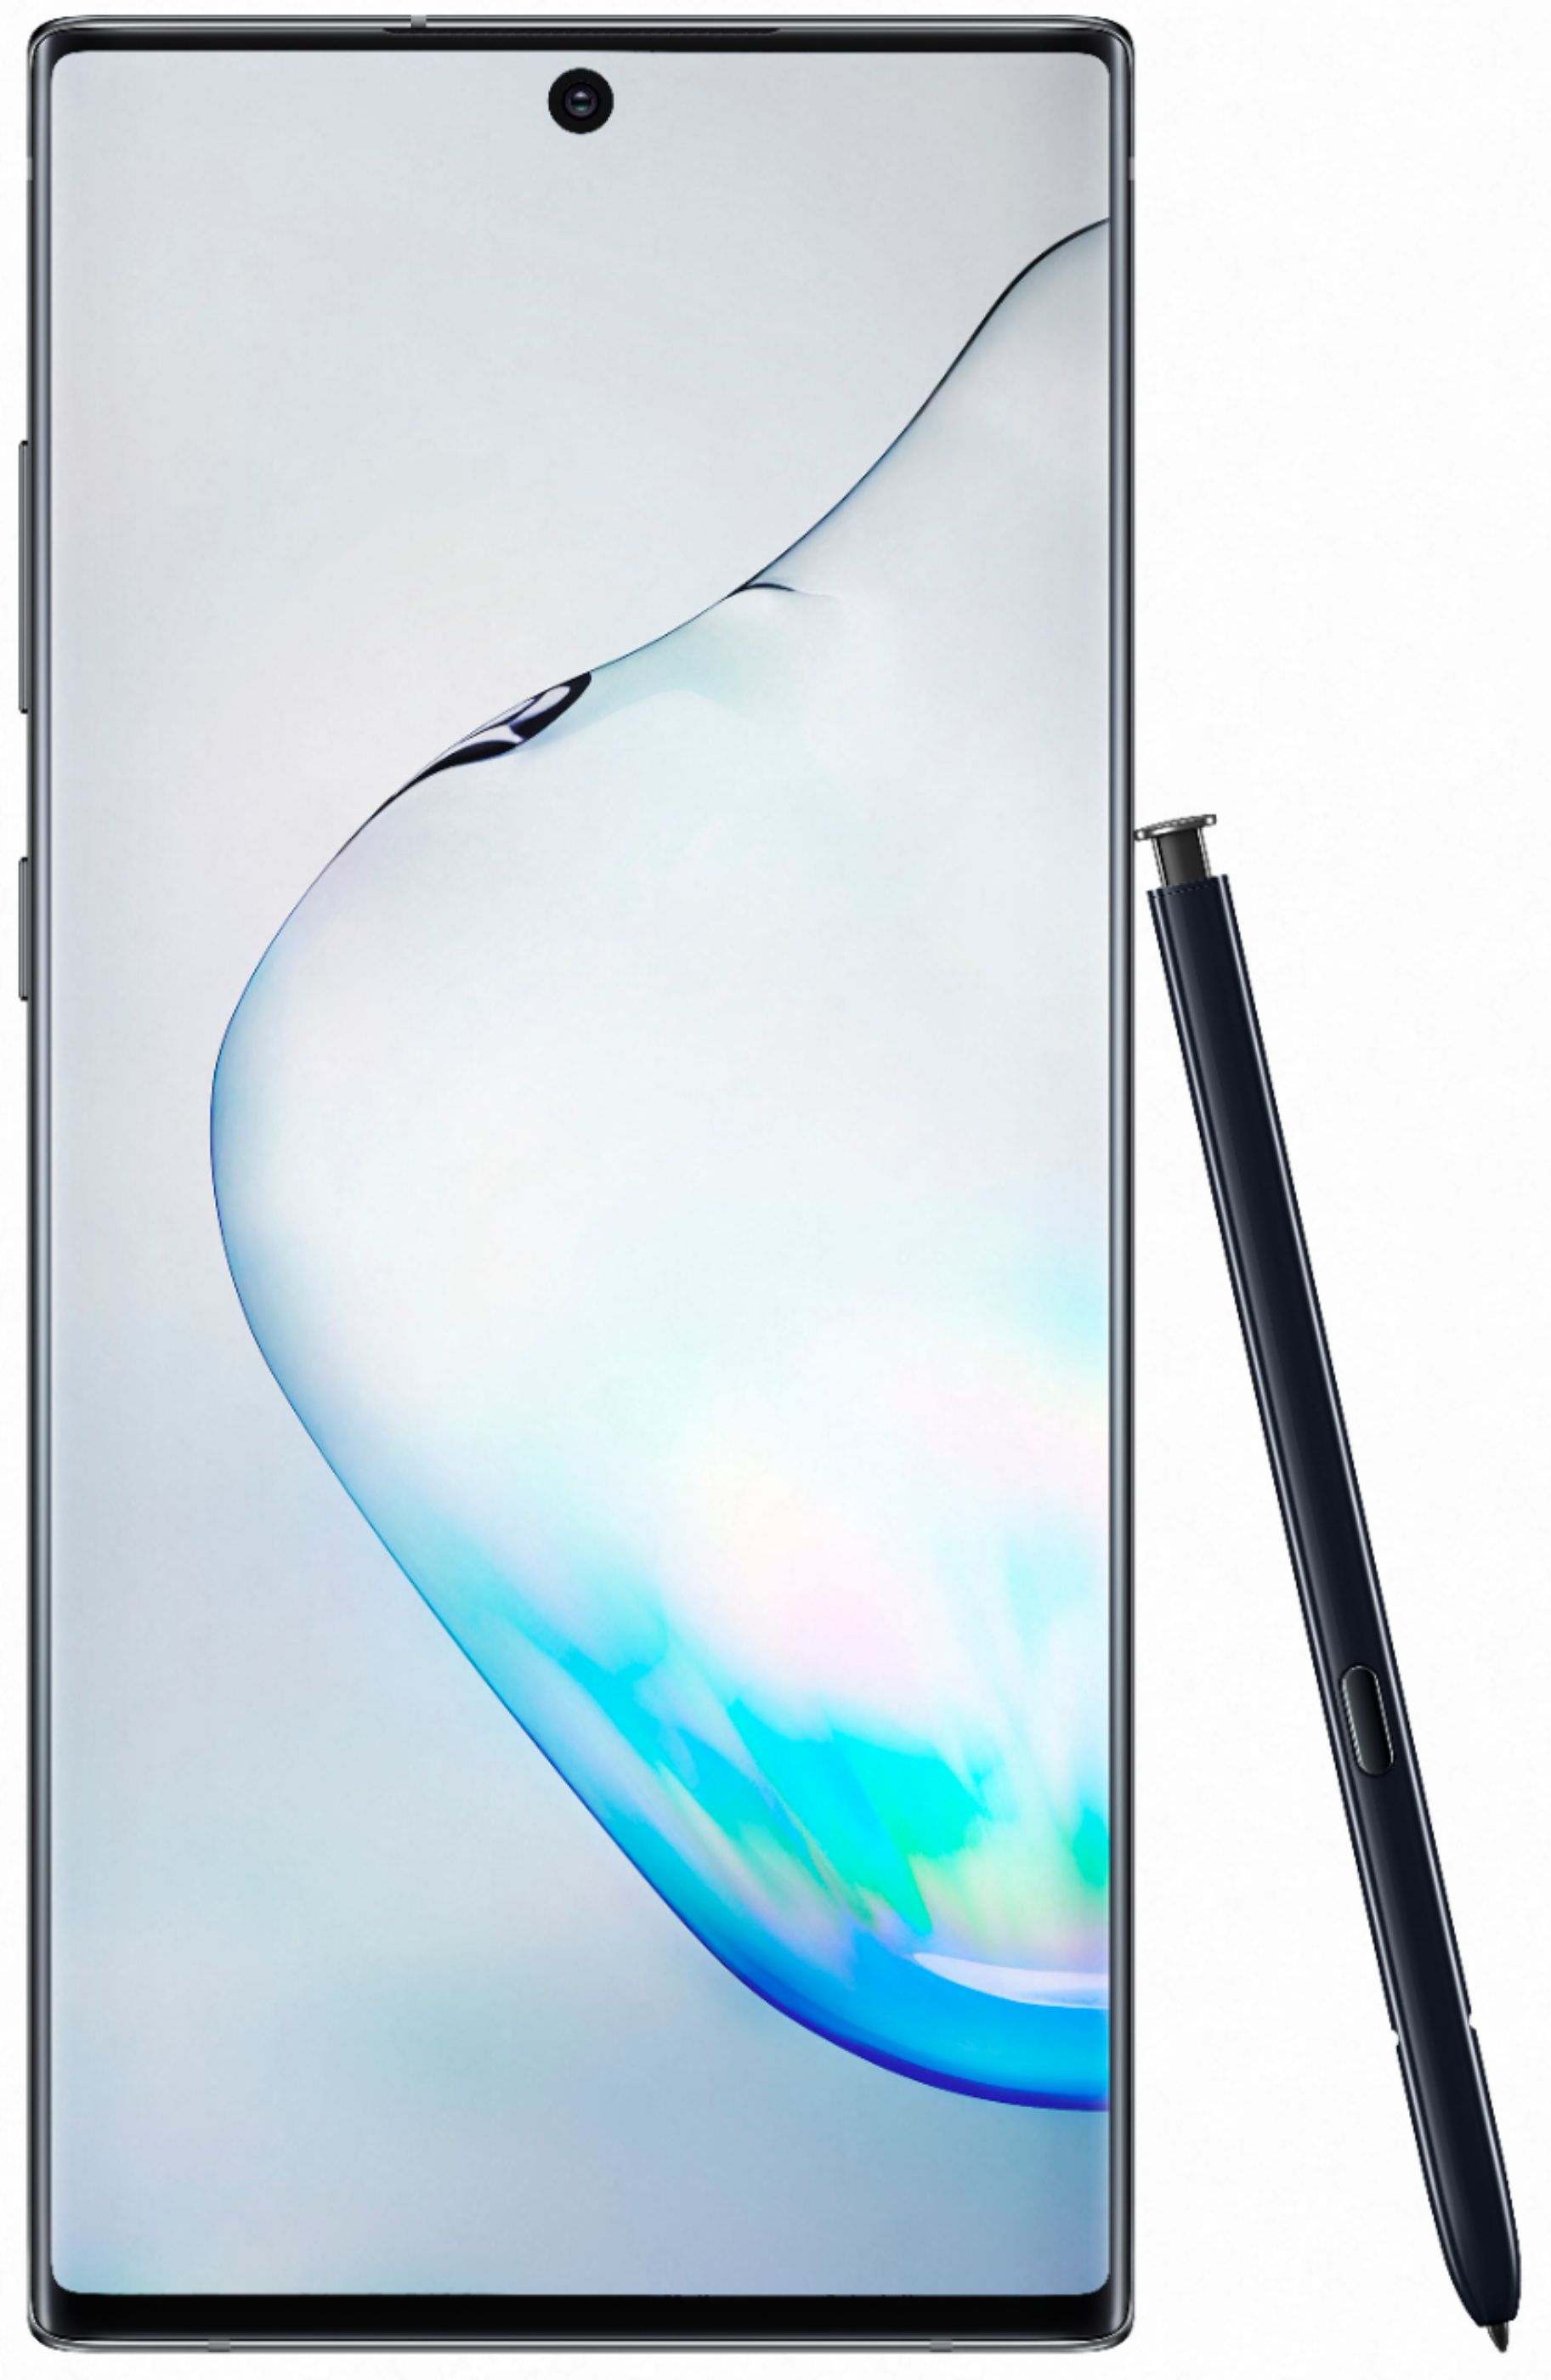 Samsung Galaxy Note 10 review: The best Galaxy phone to buy right